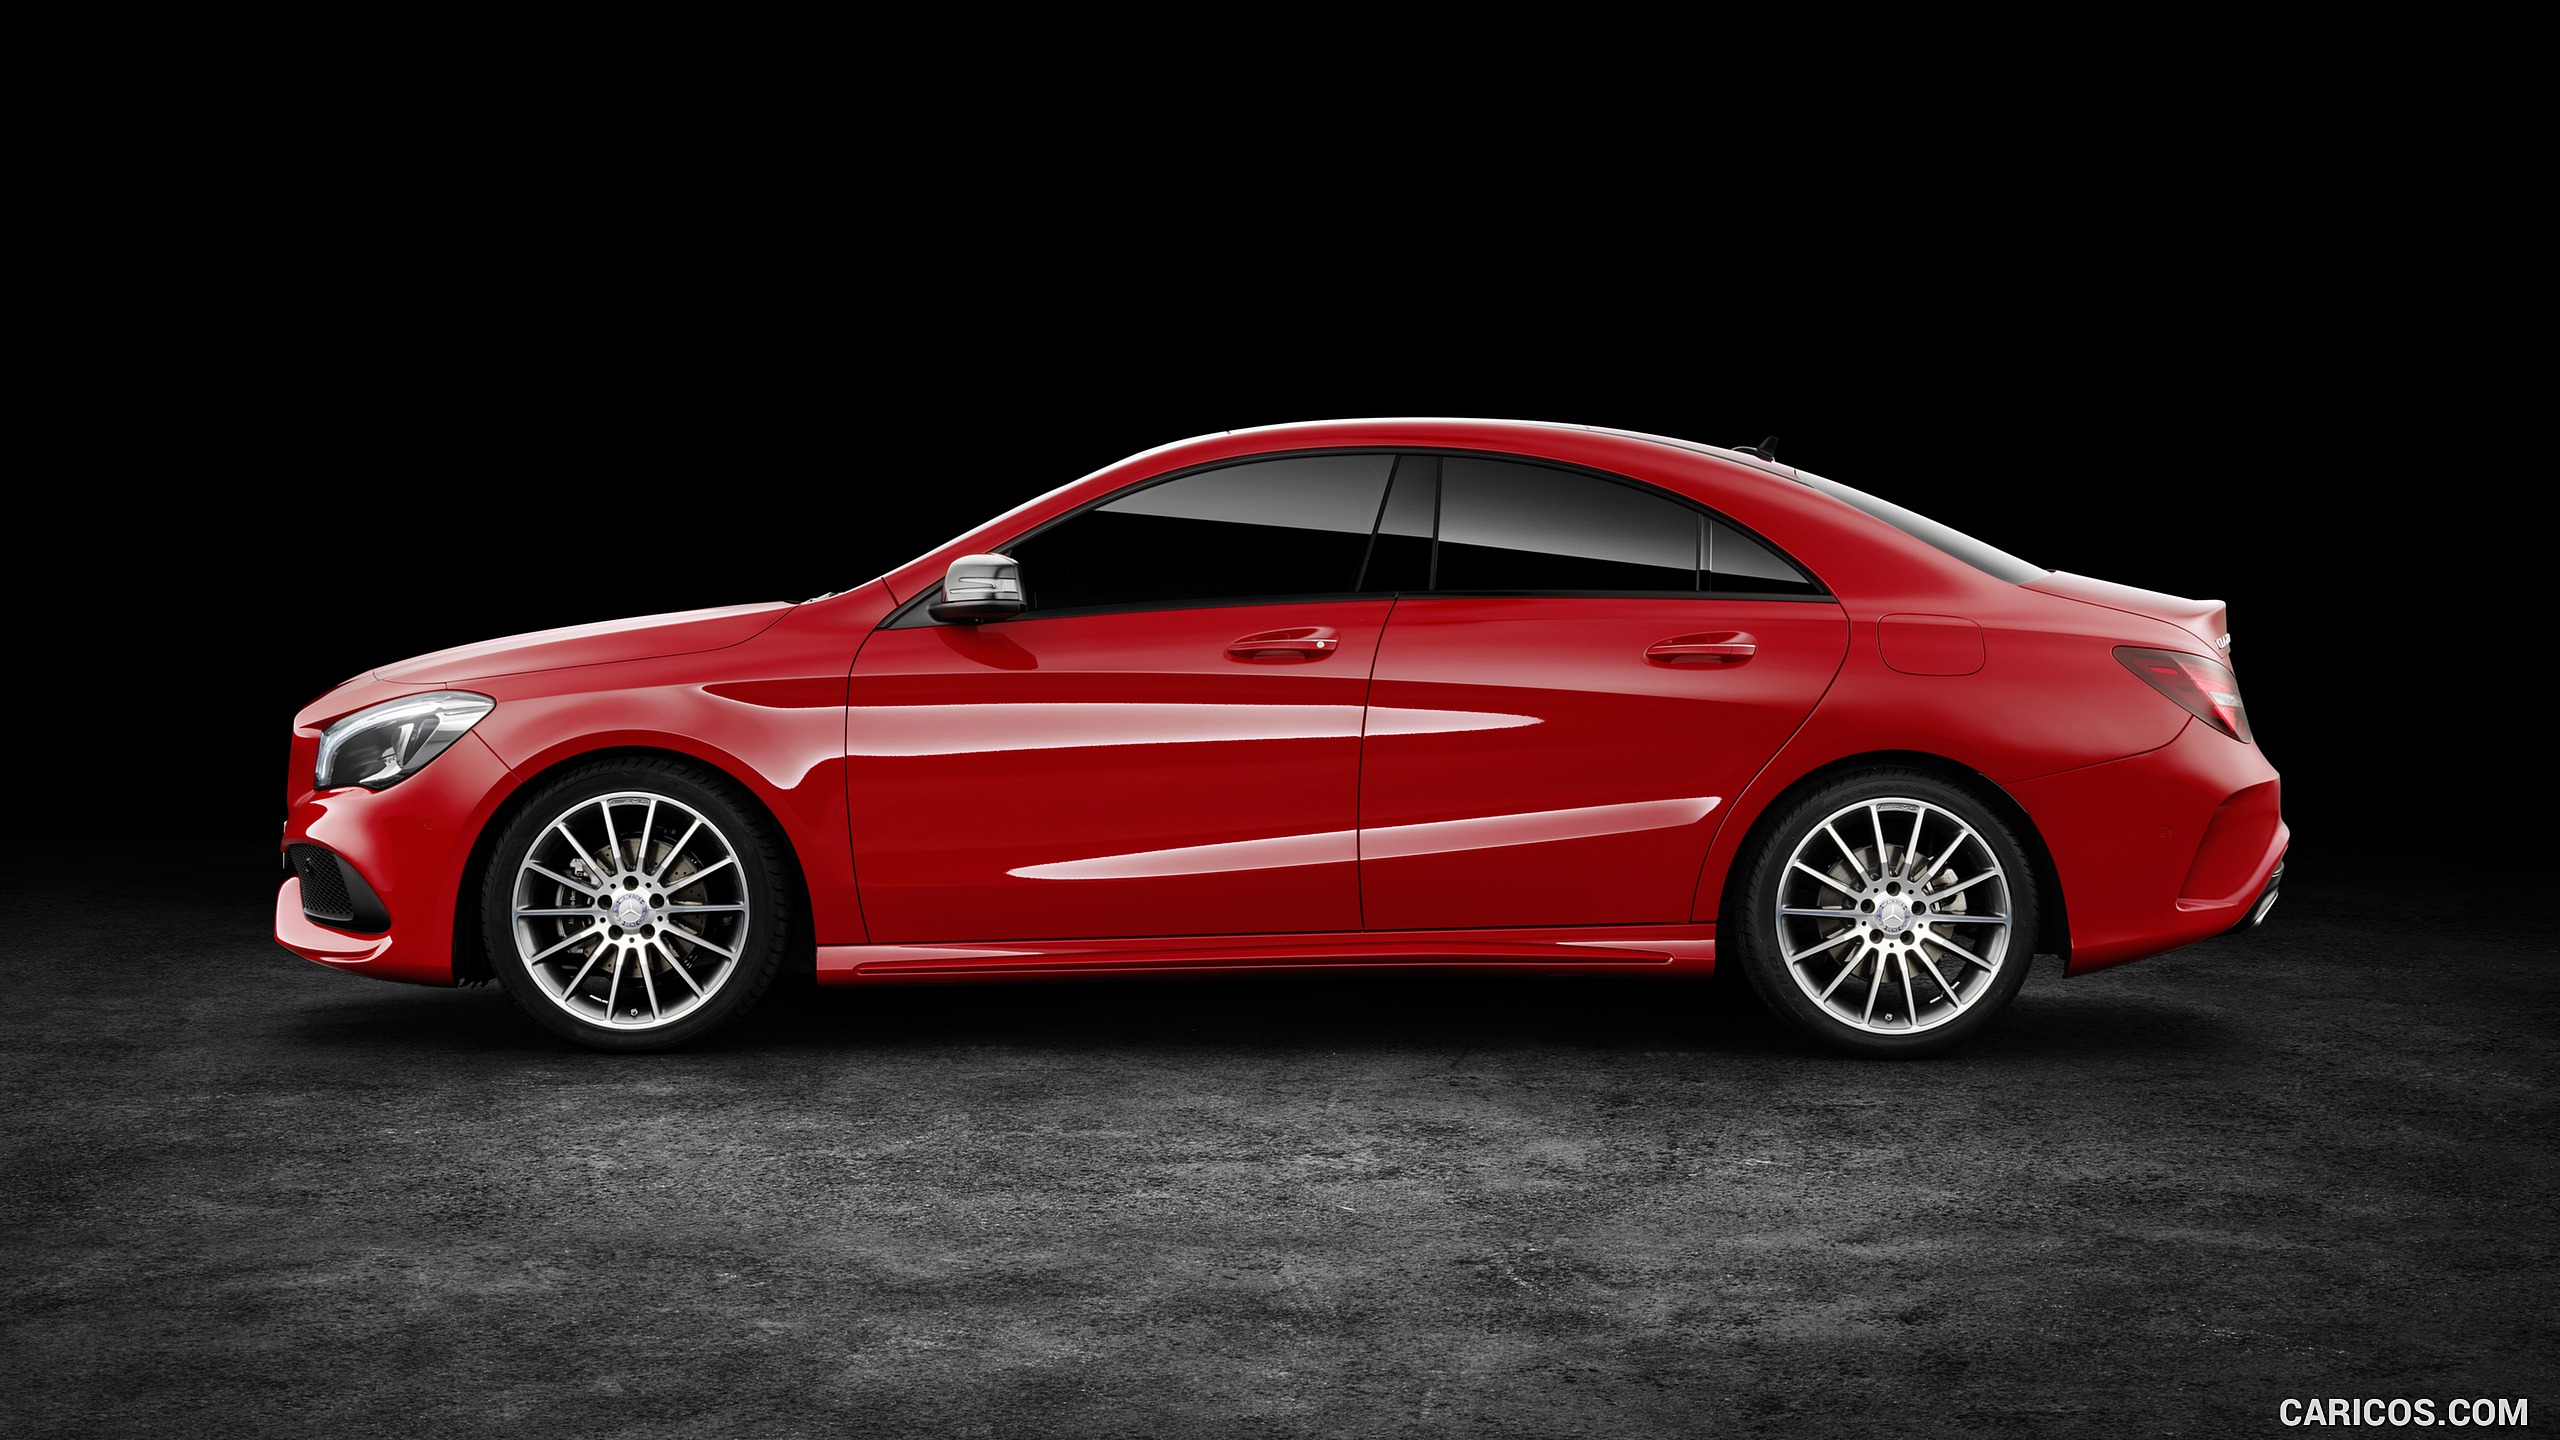 2017 Mercedes-Benz CLA 200 d 4MATIC Coupé (Chassis: C117, Color: Jupiter Red) - Side, #3 of 7